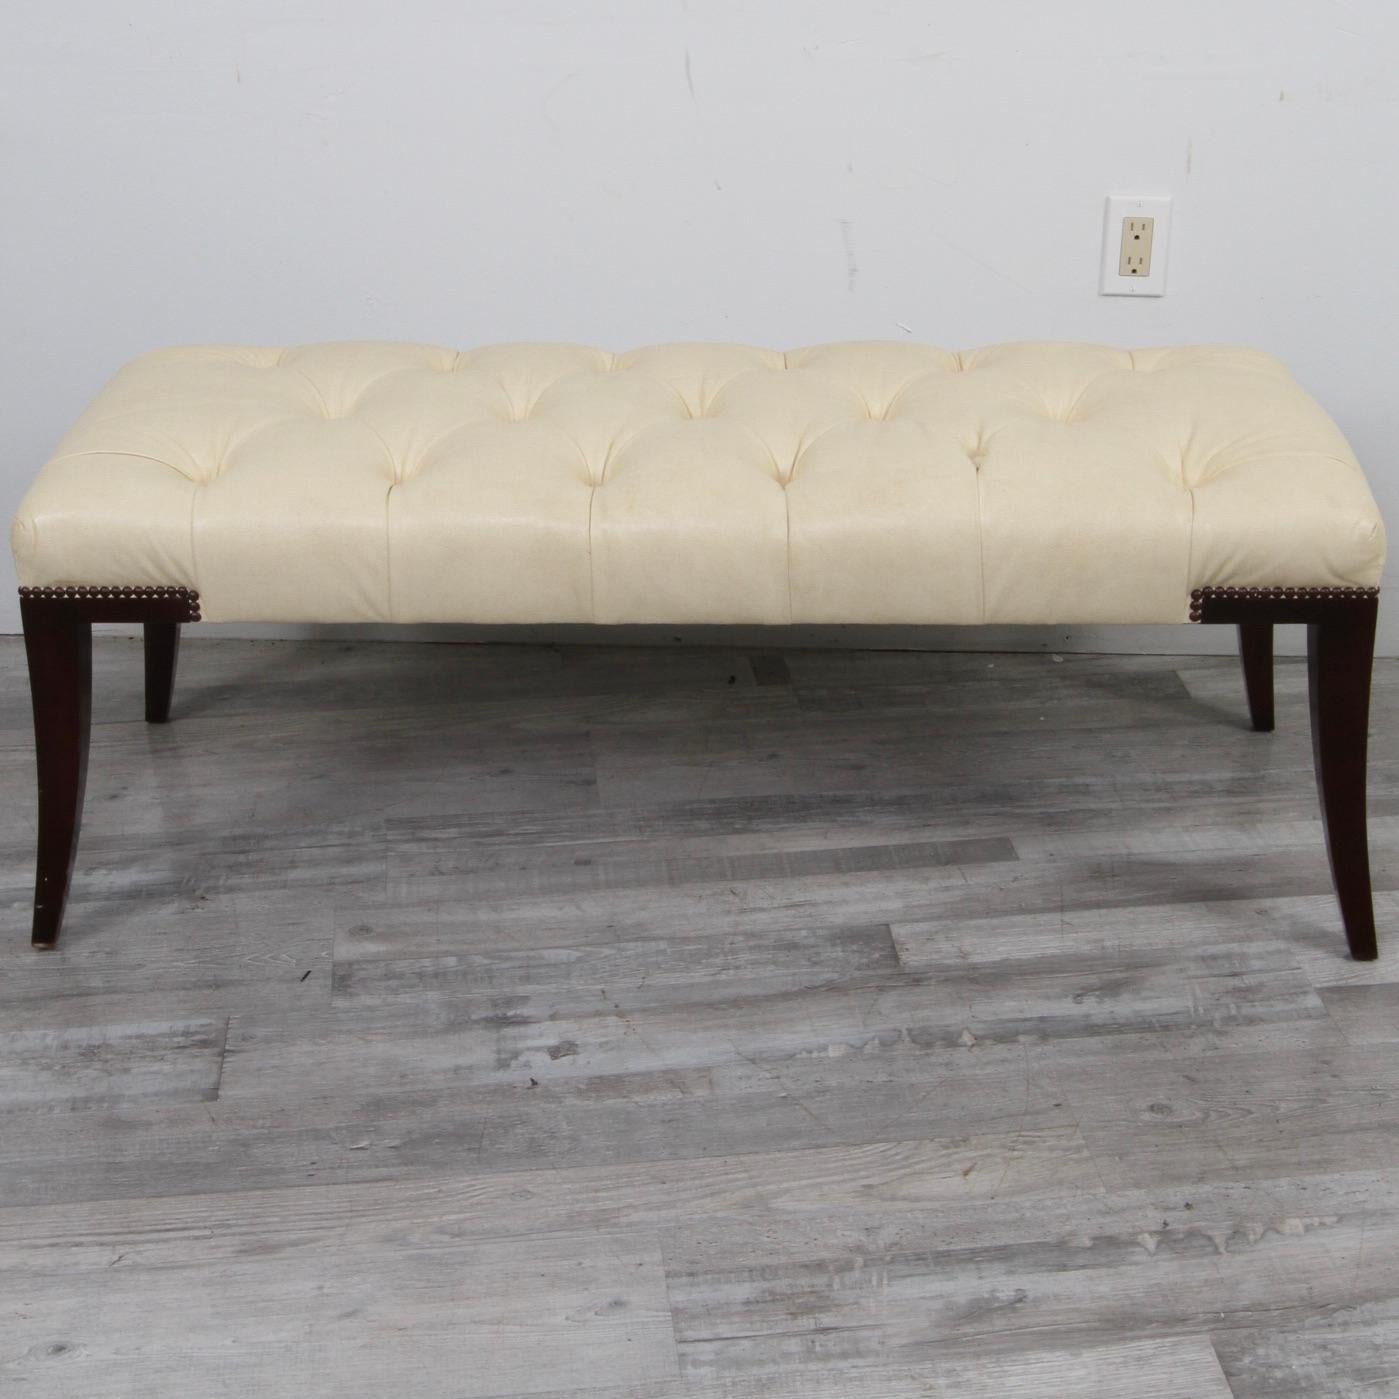 A tufted ivory leather bench by Baker Furnture. Curved + tapered legs are in finished with a nailhead detail and espresso stain. Tufted upholstery is fabricated in a soft and warm neutral leather. Beautiful bench designed by Thomas Pheasant and